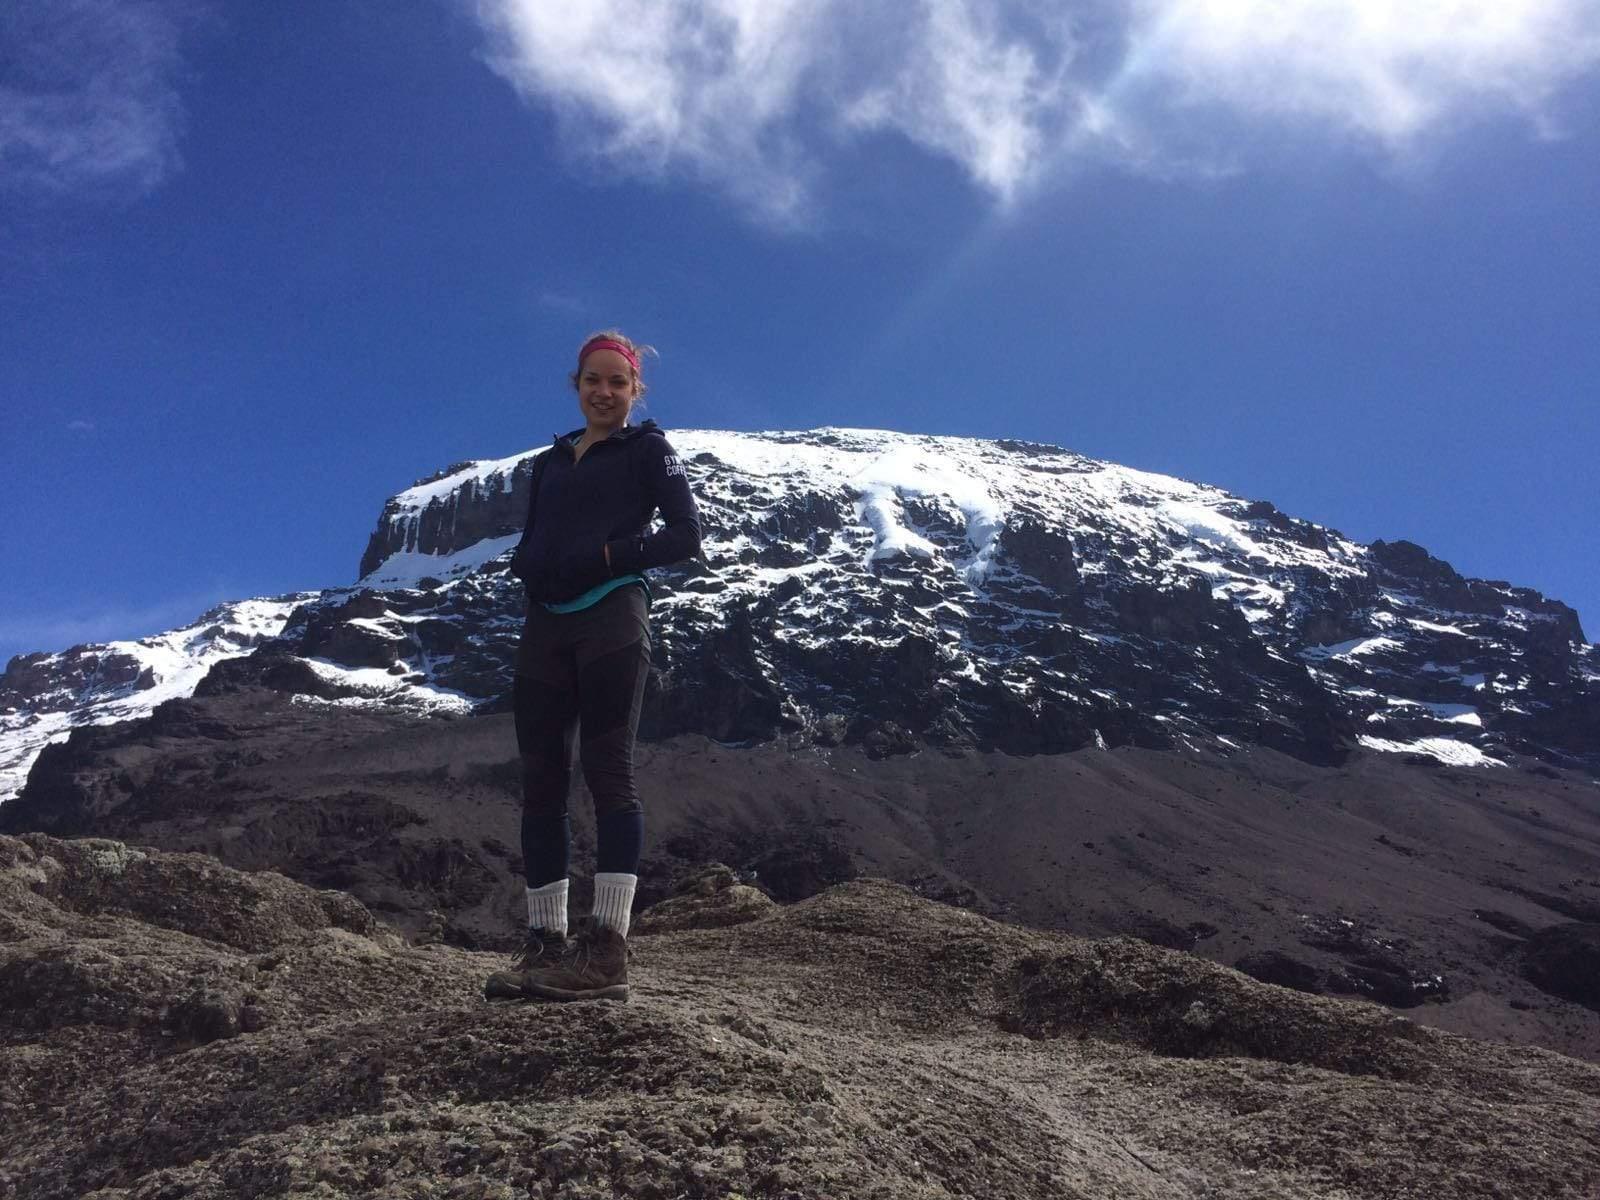 People of the Hoodies in the Wild - Solo Trip Up Mount Kilimanjaro - Gym+Coffee